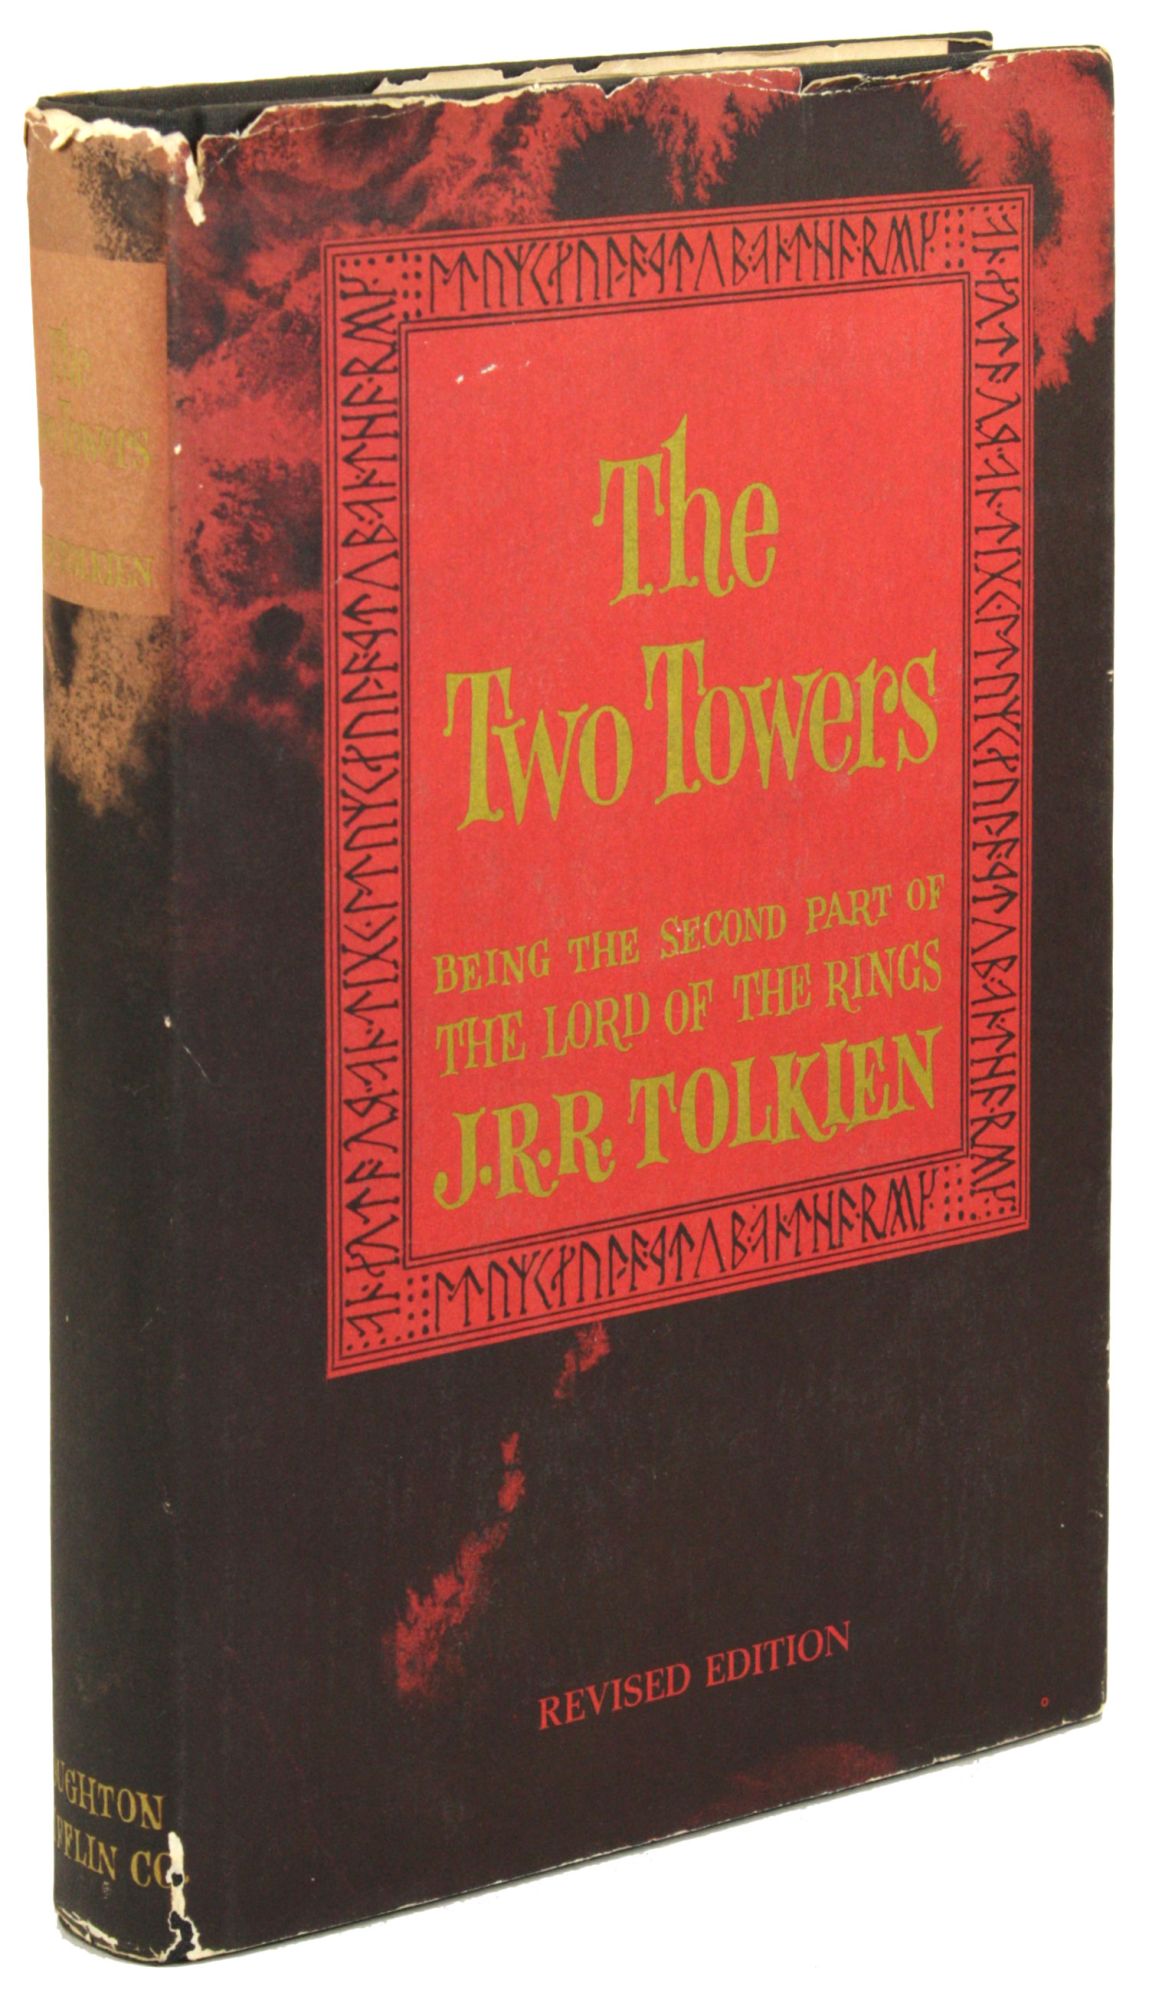 The Two Towers  by Tolkien